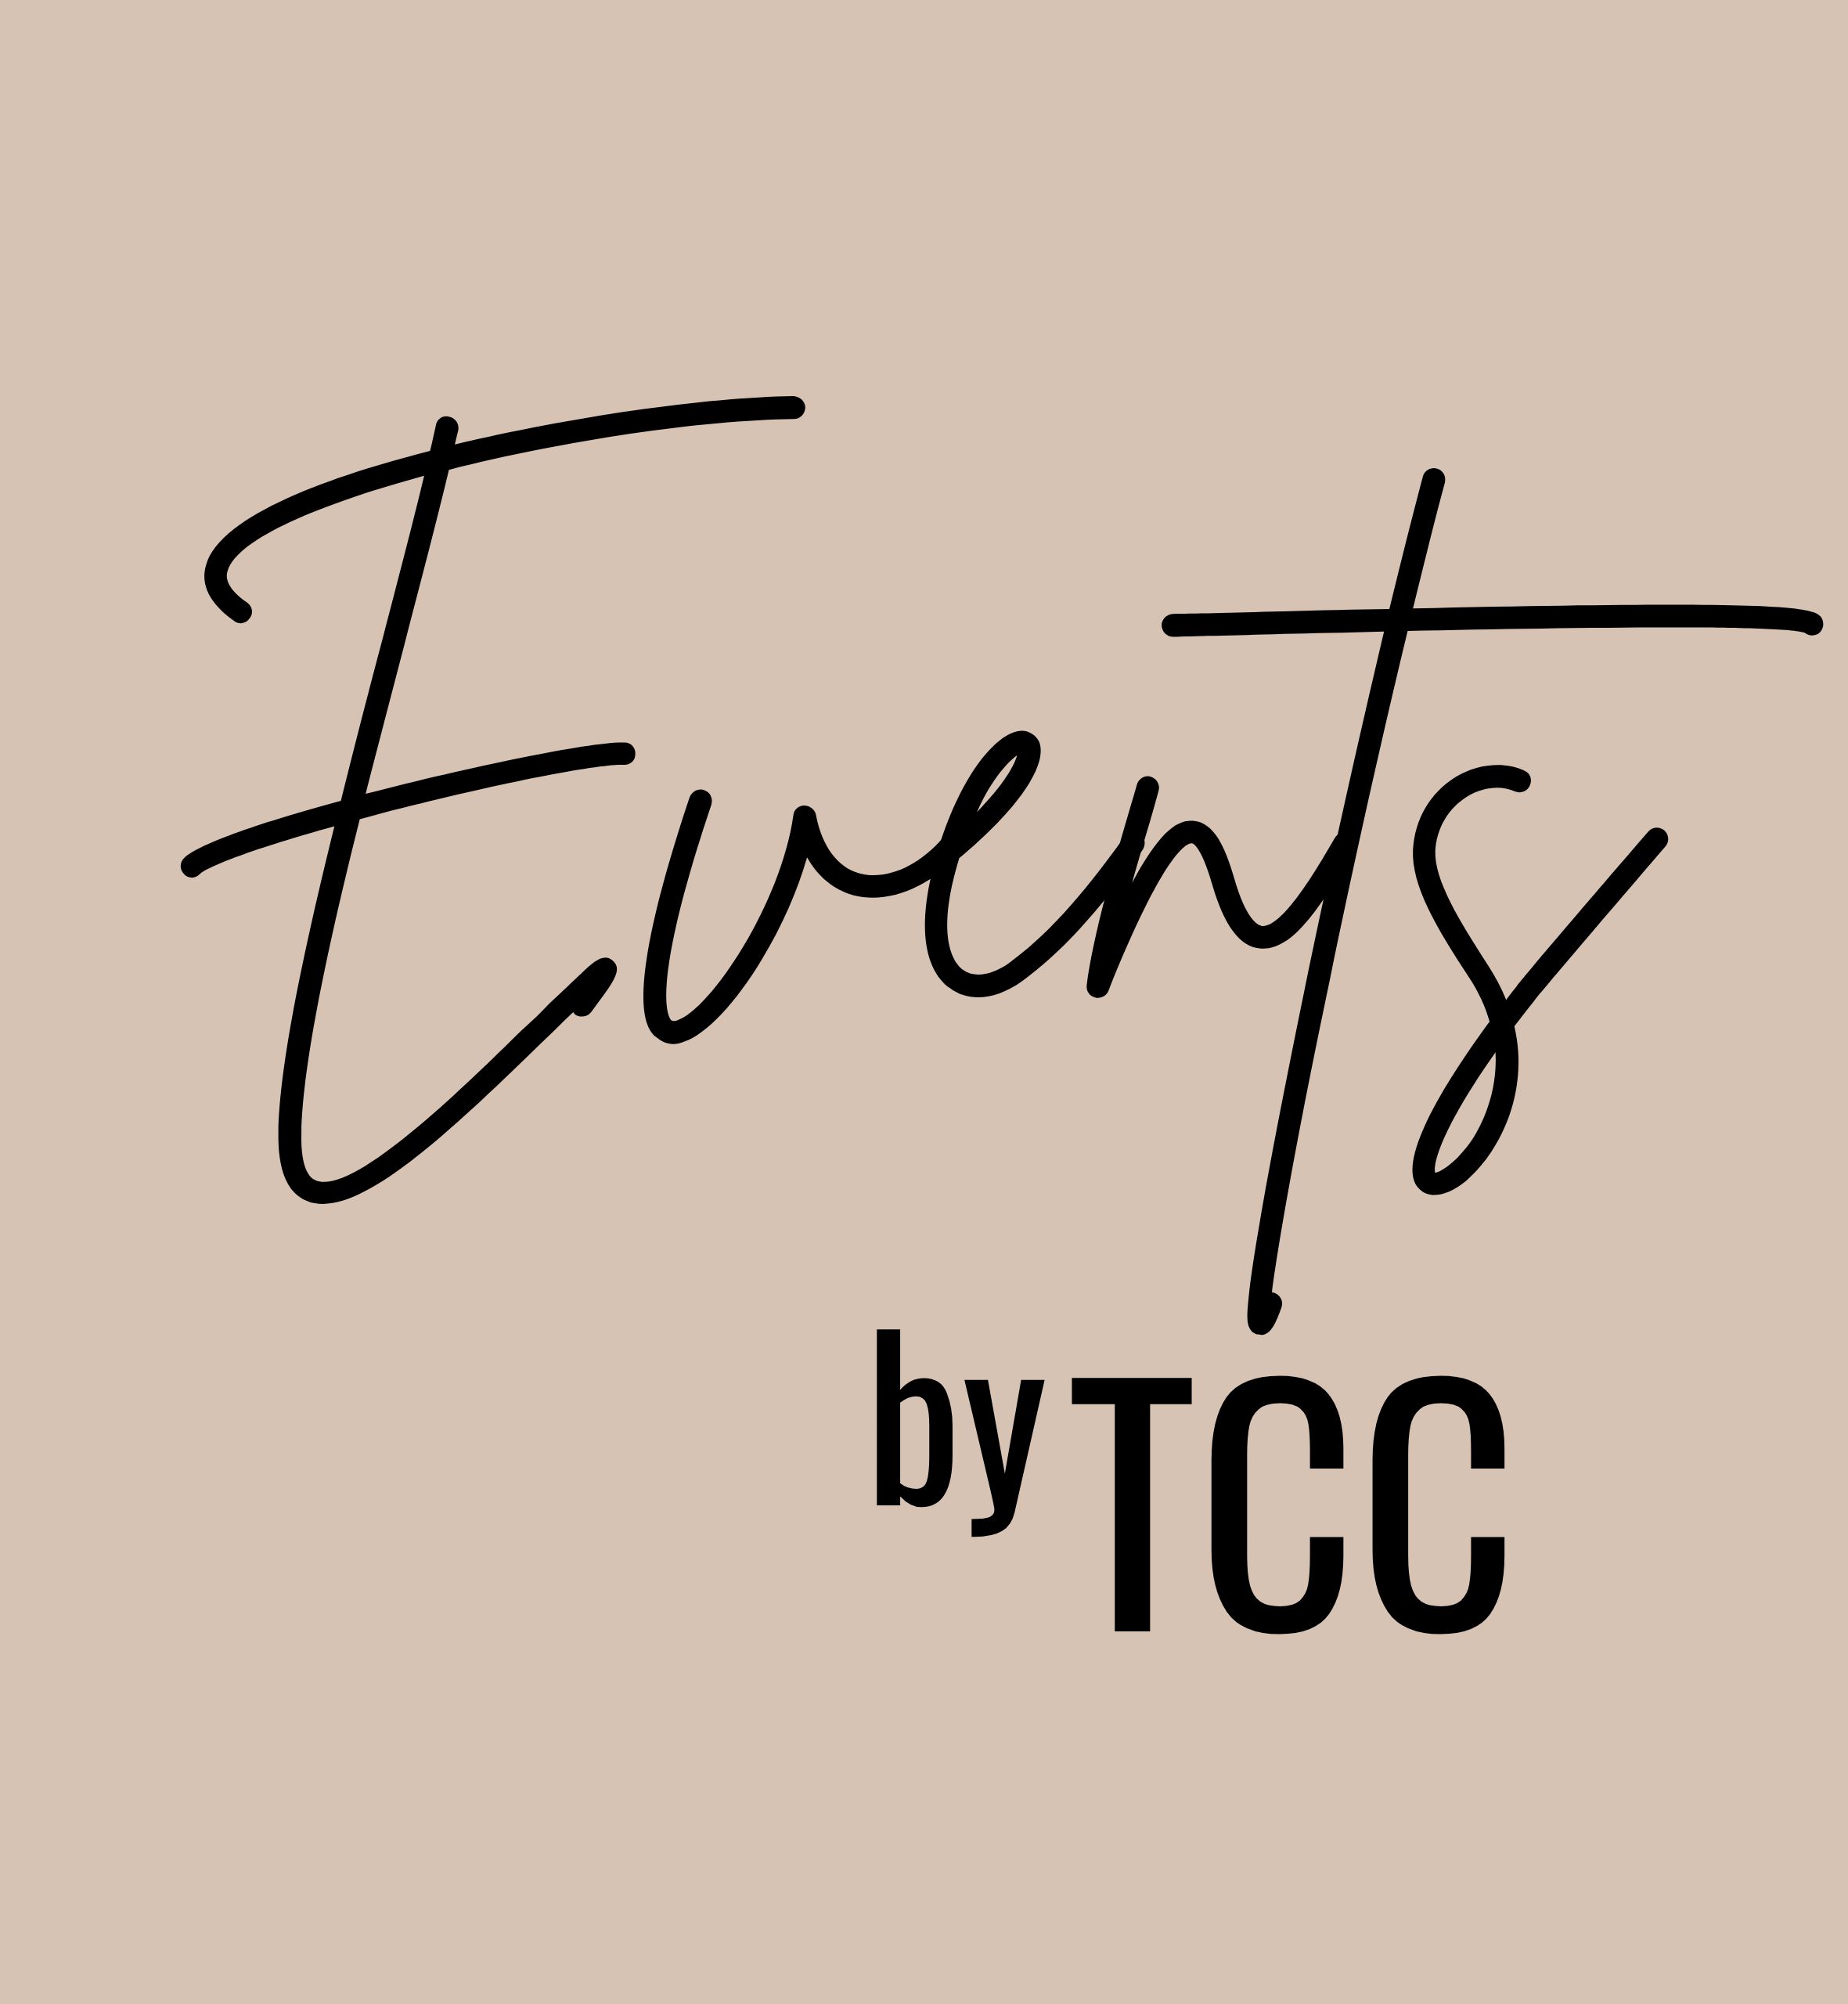 Events by TCC